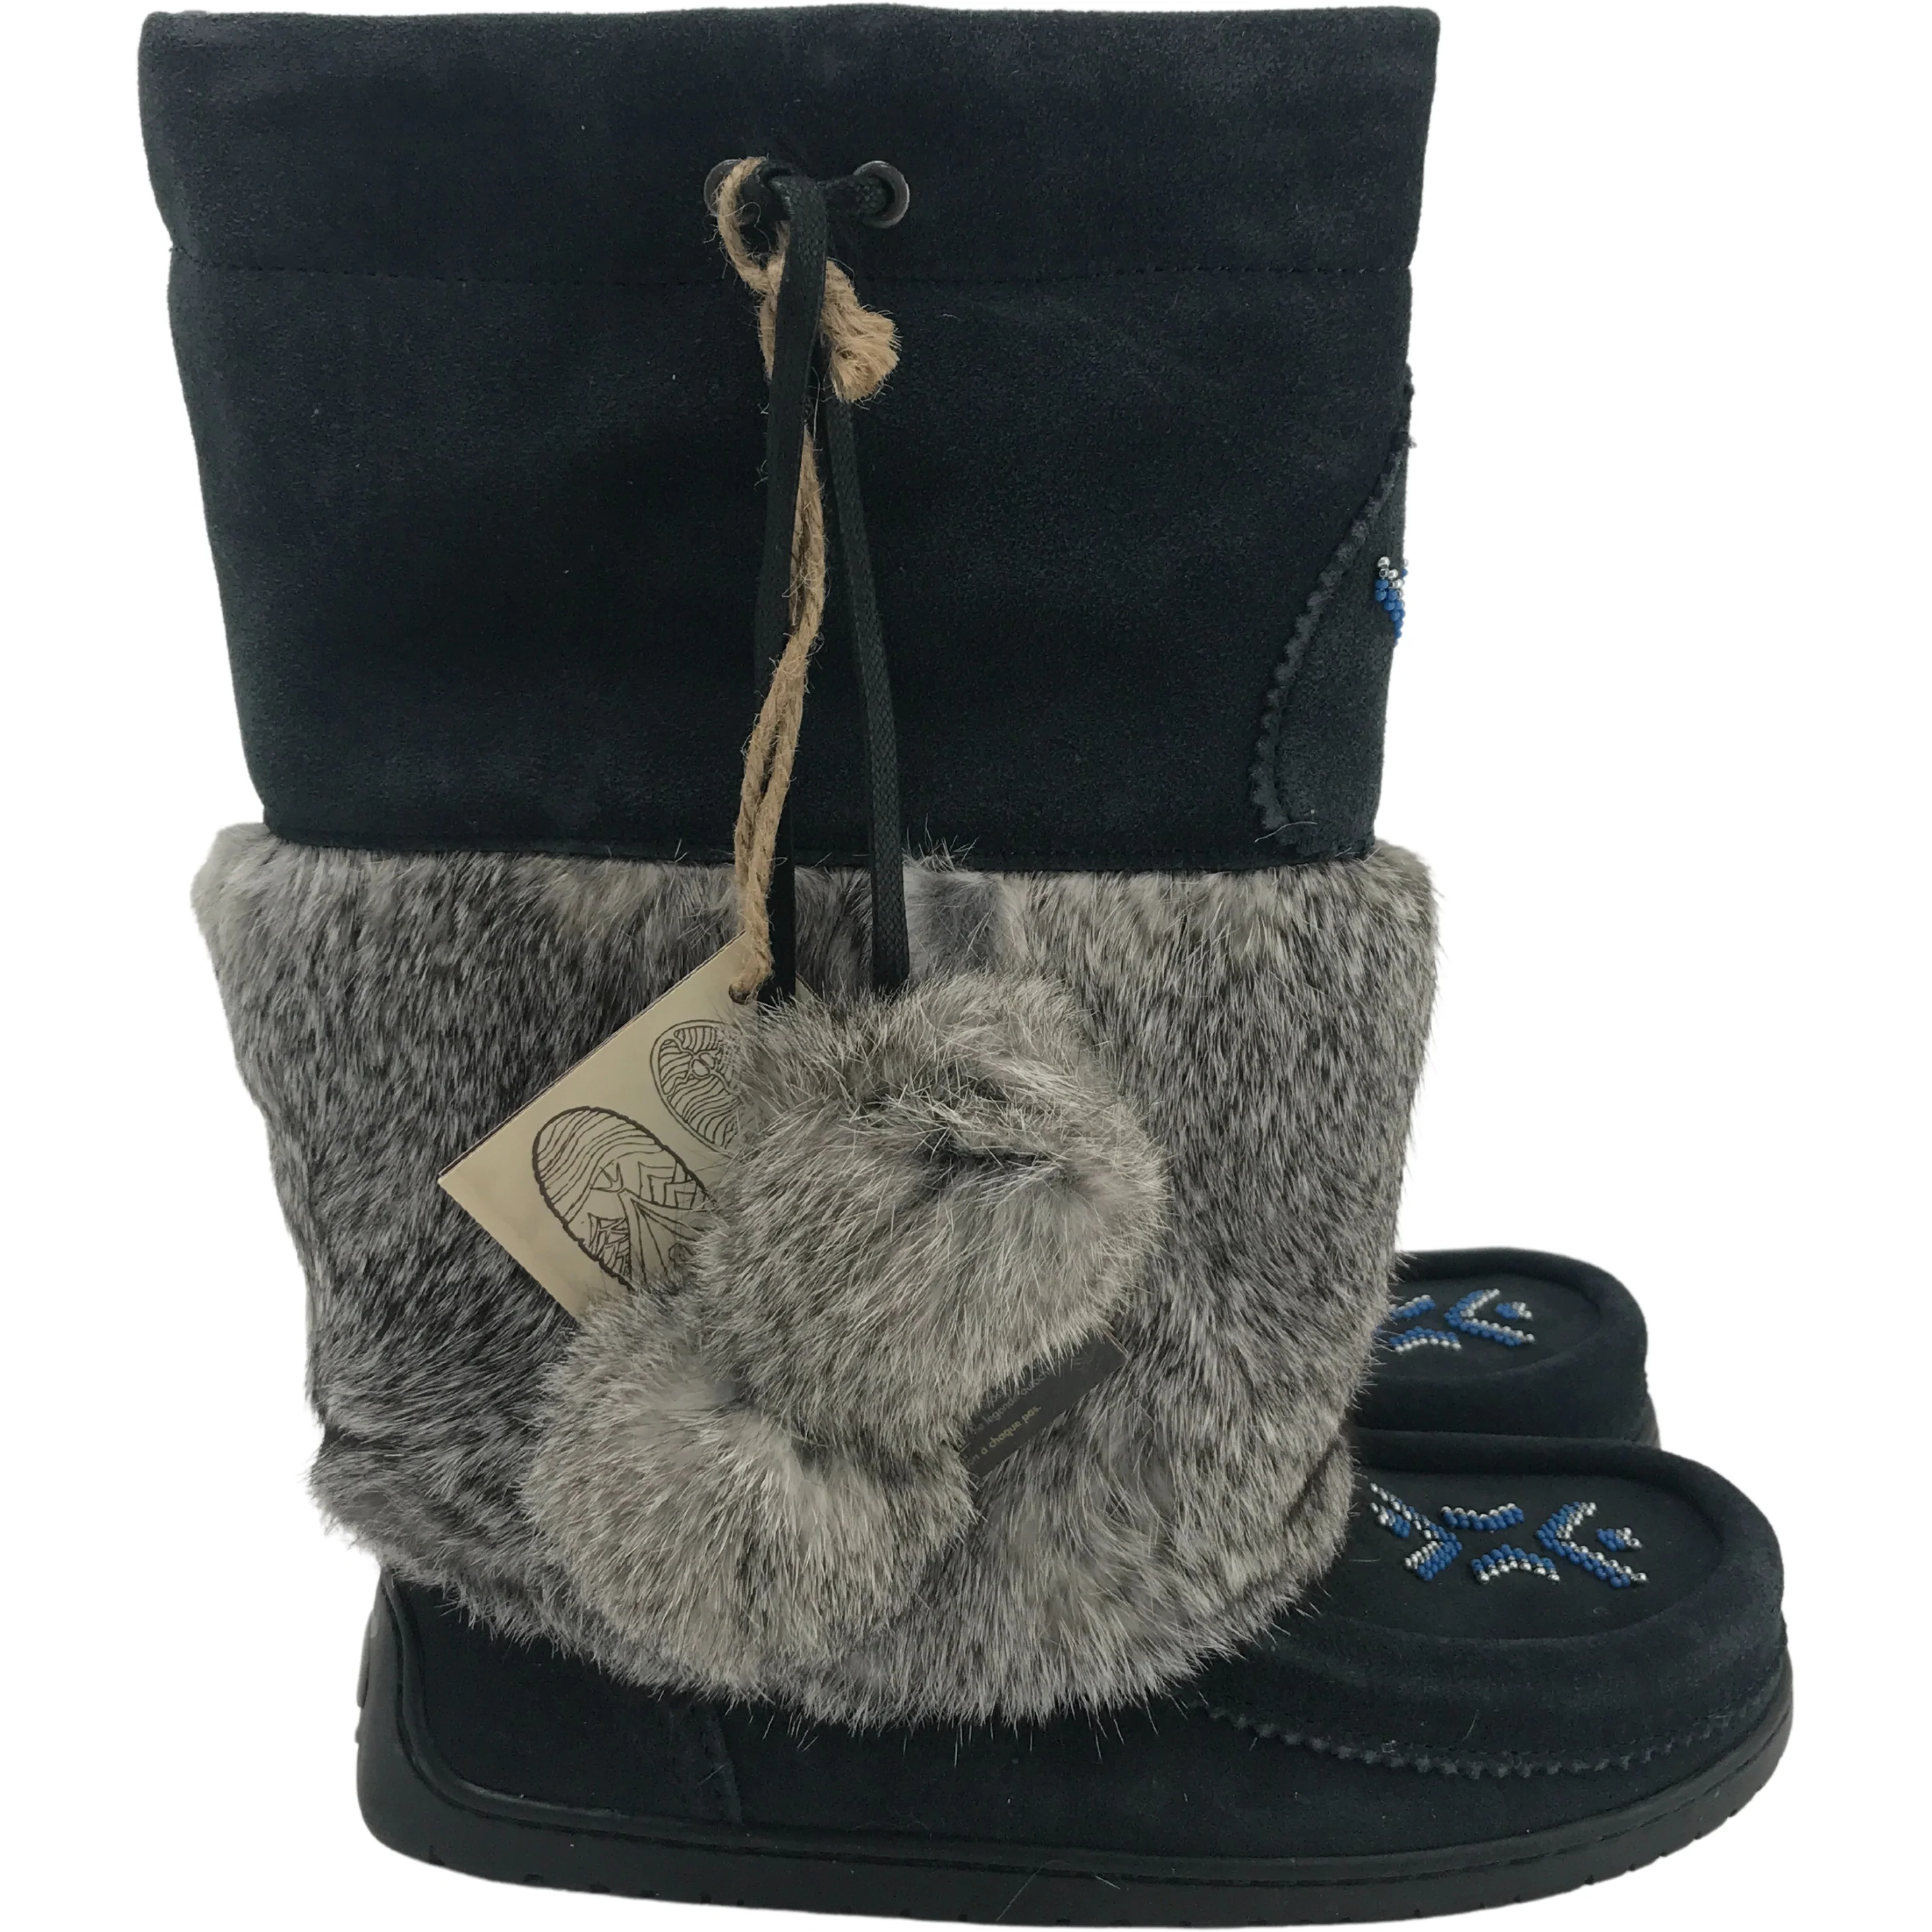 Manitobah Mukluks Women's Winter Boots / Tall Boots / Navy & Grey / Fur / Size 9